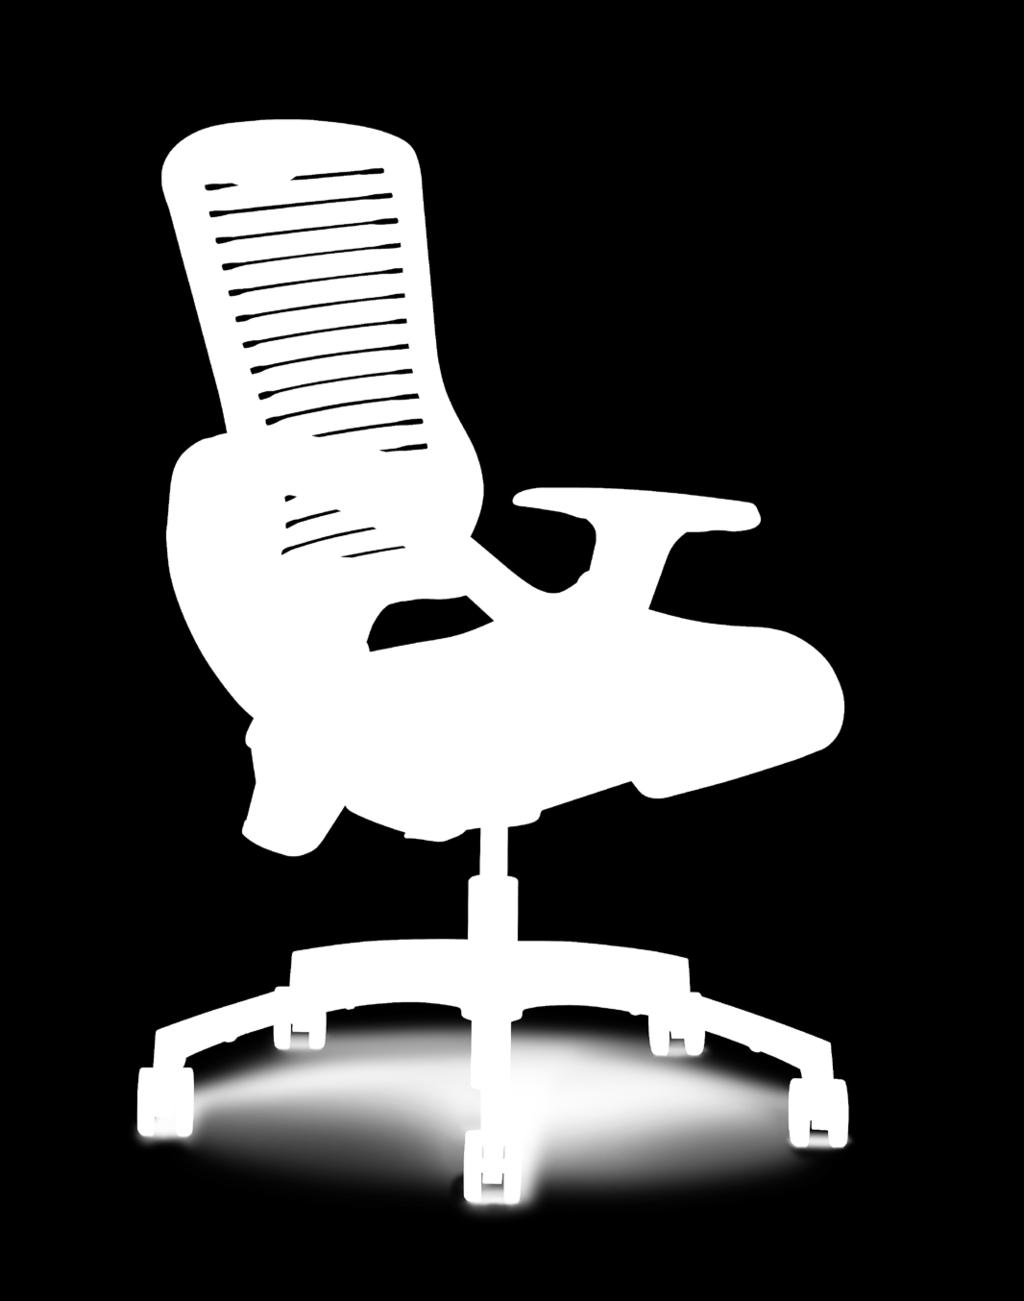 The patent-pending user driven technology uses a unique geometry that links the seat and back movement around an ergonomically positioned hip pivot point, resulting in a highly comfortable chair